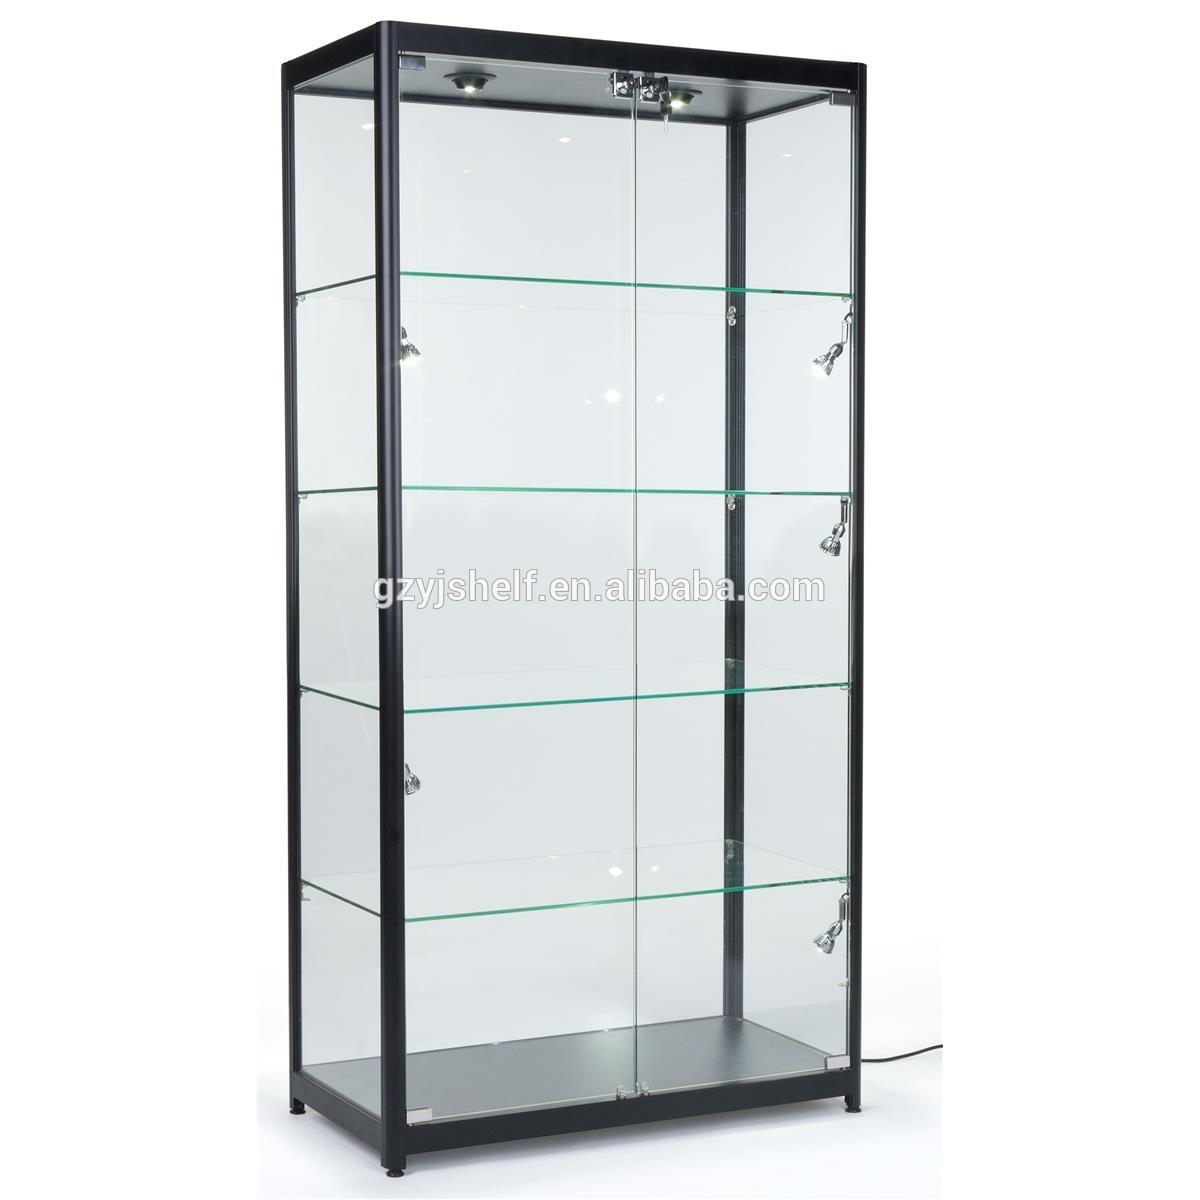 Tempered Glass Curio Cabinet With 8 Halogen Lights, 78 x 40 x 16.5-Inch, Free-Standing, Locking Hinged Doors, Floor Levelers And 4 Green Edge Glass Shelves - Black, Aluminum